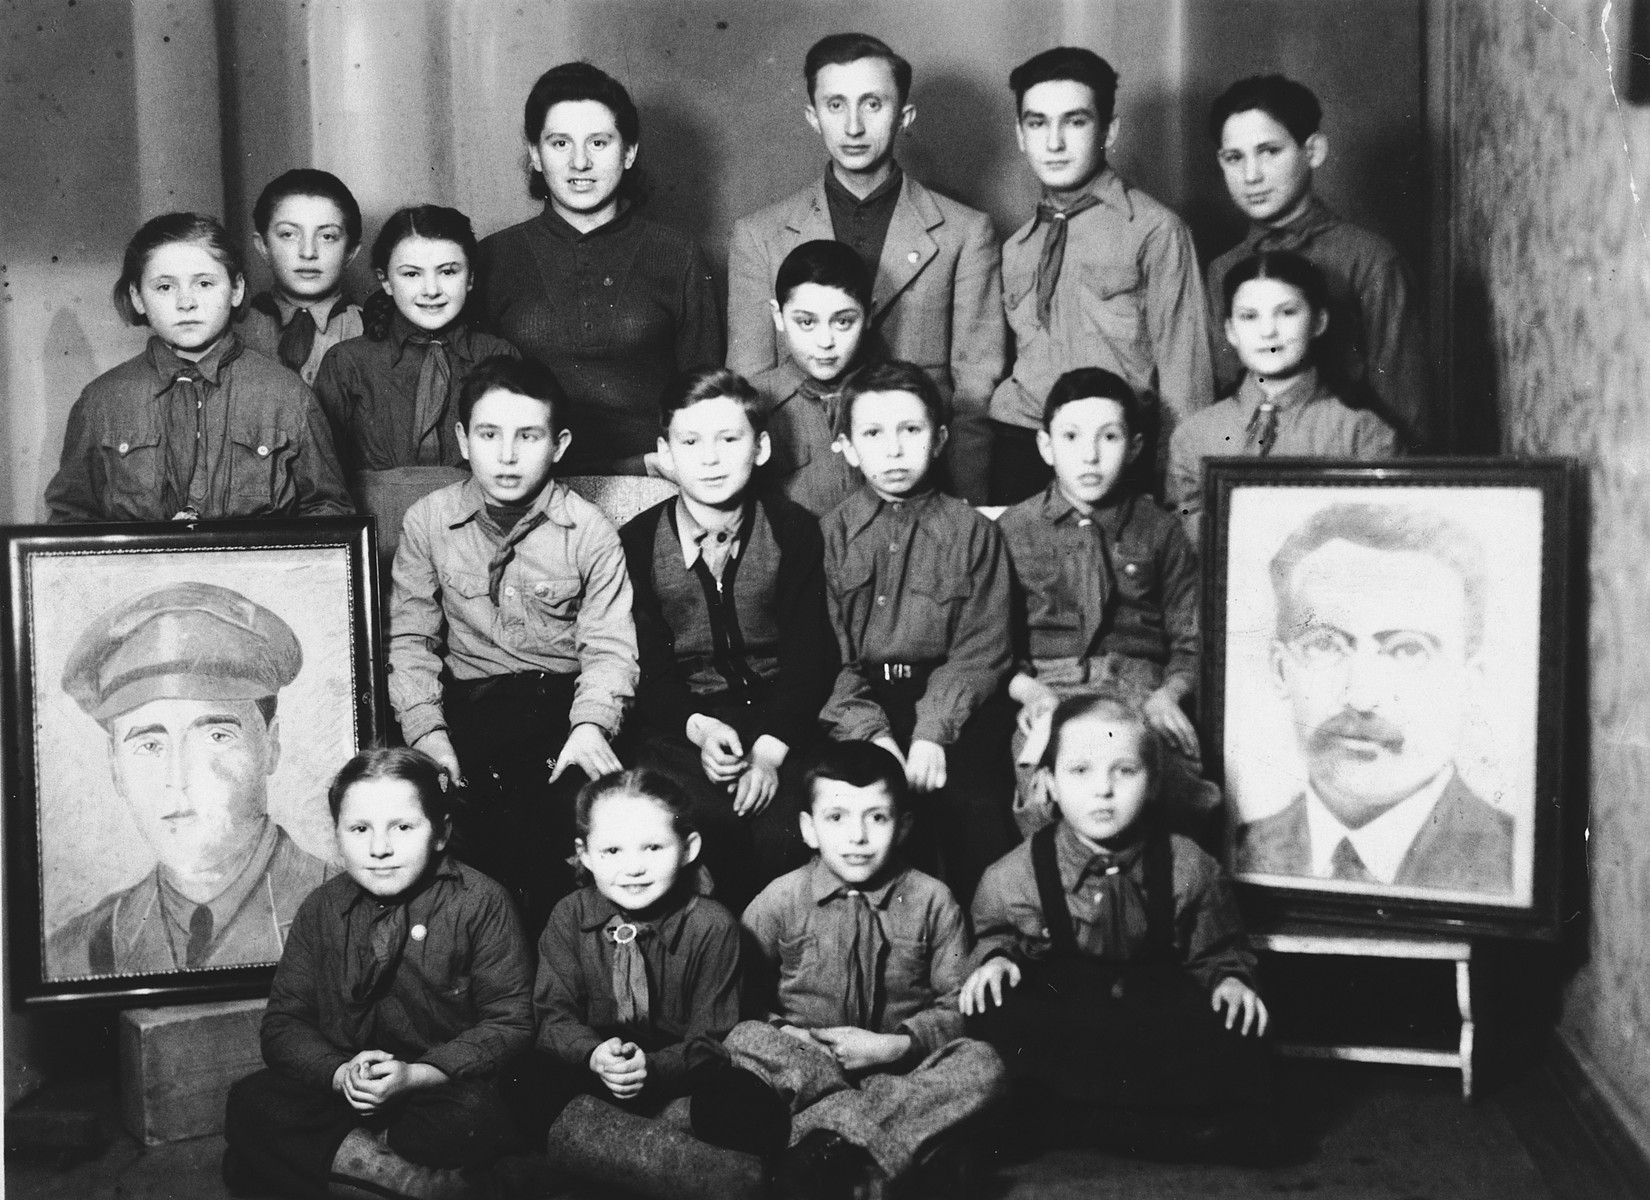 Children belonging to the Zionist  youth movement Dror in Poland pose between portraits of two Zionist heroes, Joseph Trumpeldor and Ber Borochov.

Among those seated on the floor is Leah Szain.